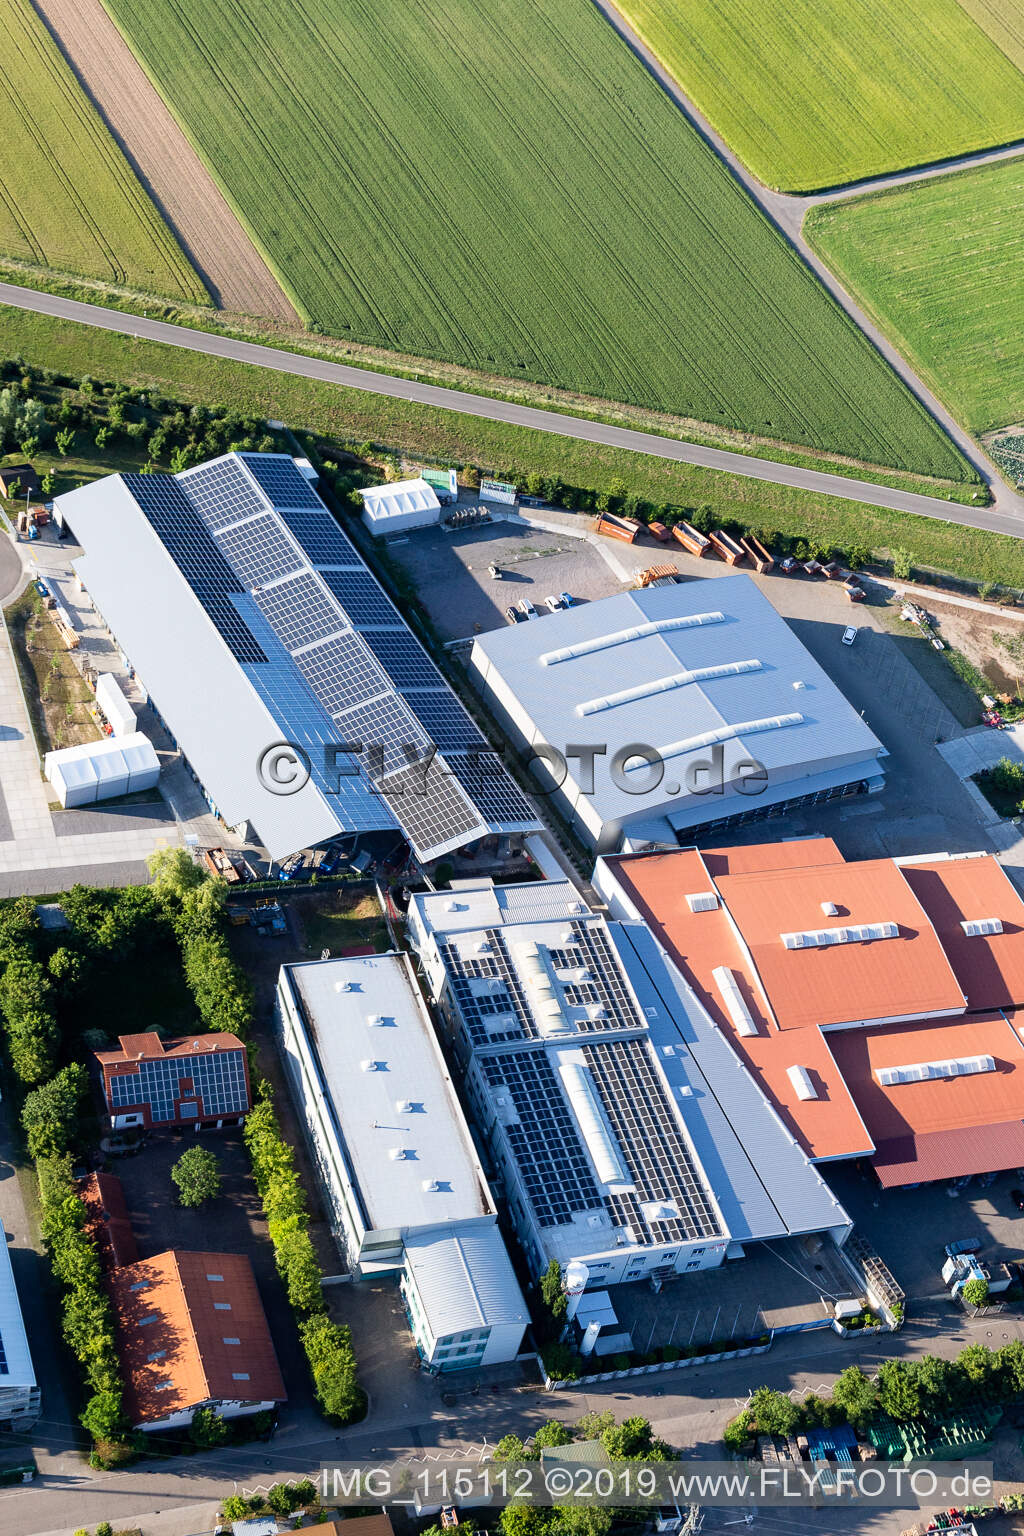 Commercial area Im Gereut, HGGS LaserCUT GmbH & Co. KG in Hatzenbühl in the state Rhineland-Palatinate, Germany from the plane